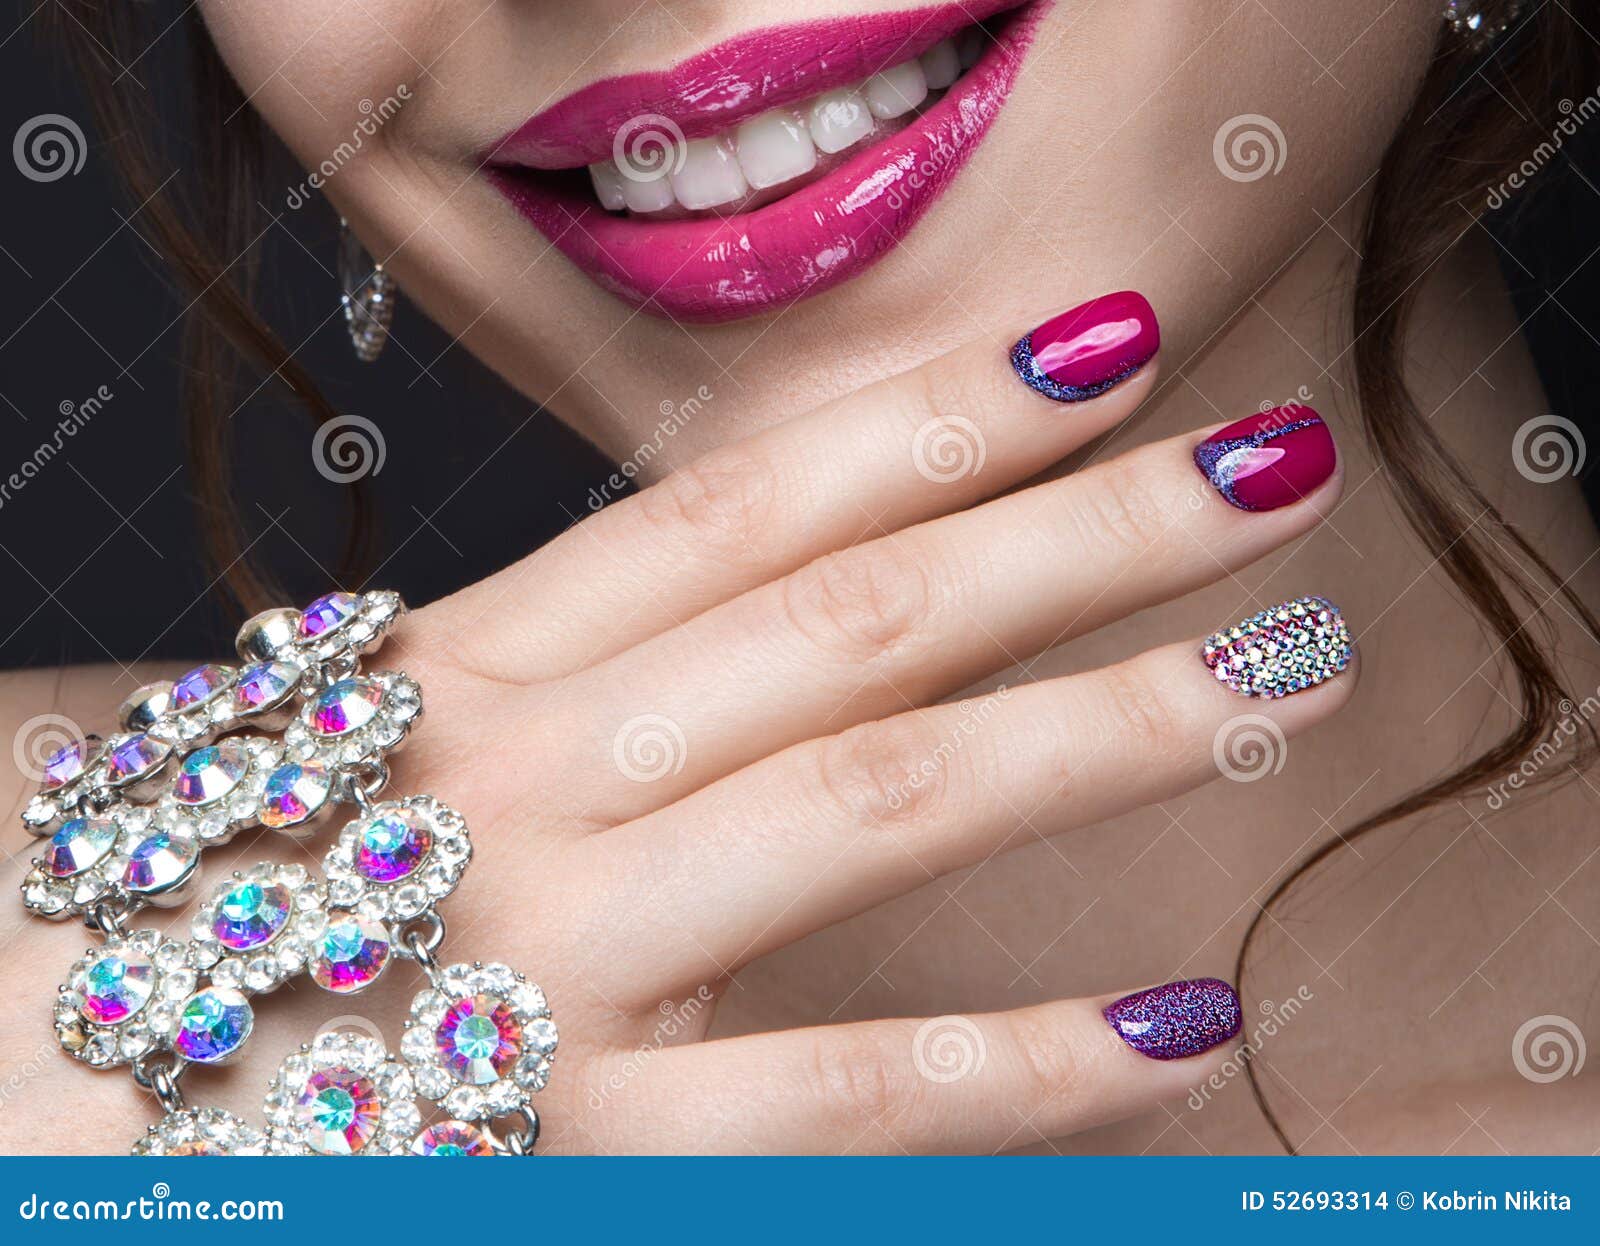 Beautiful Girl With A Bright Evening Make Up And Pink Manicure With